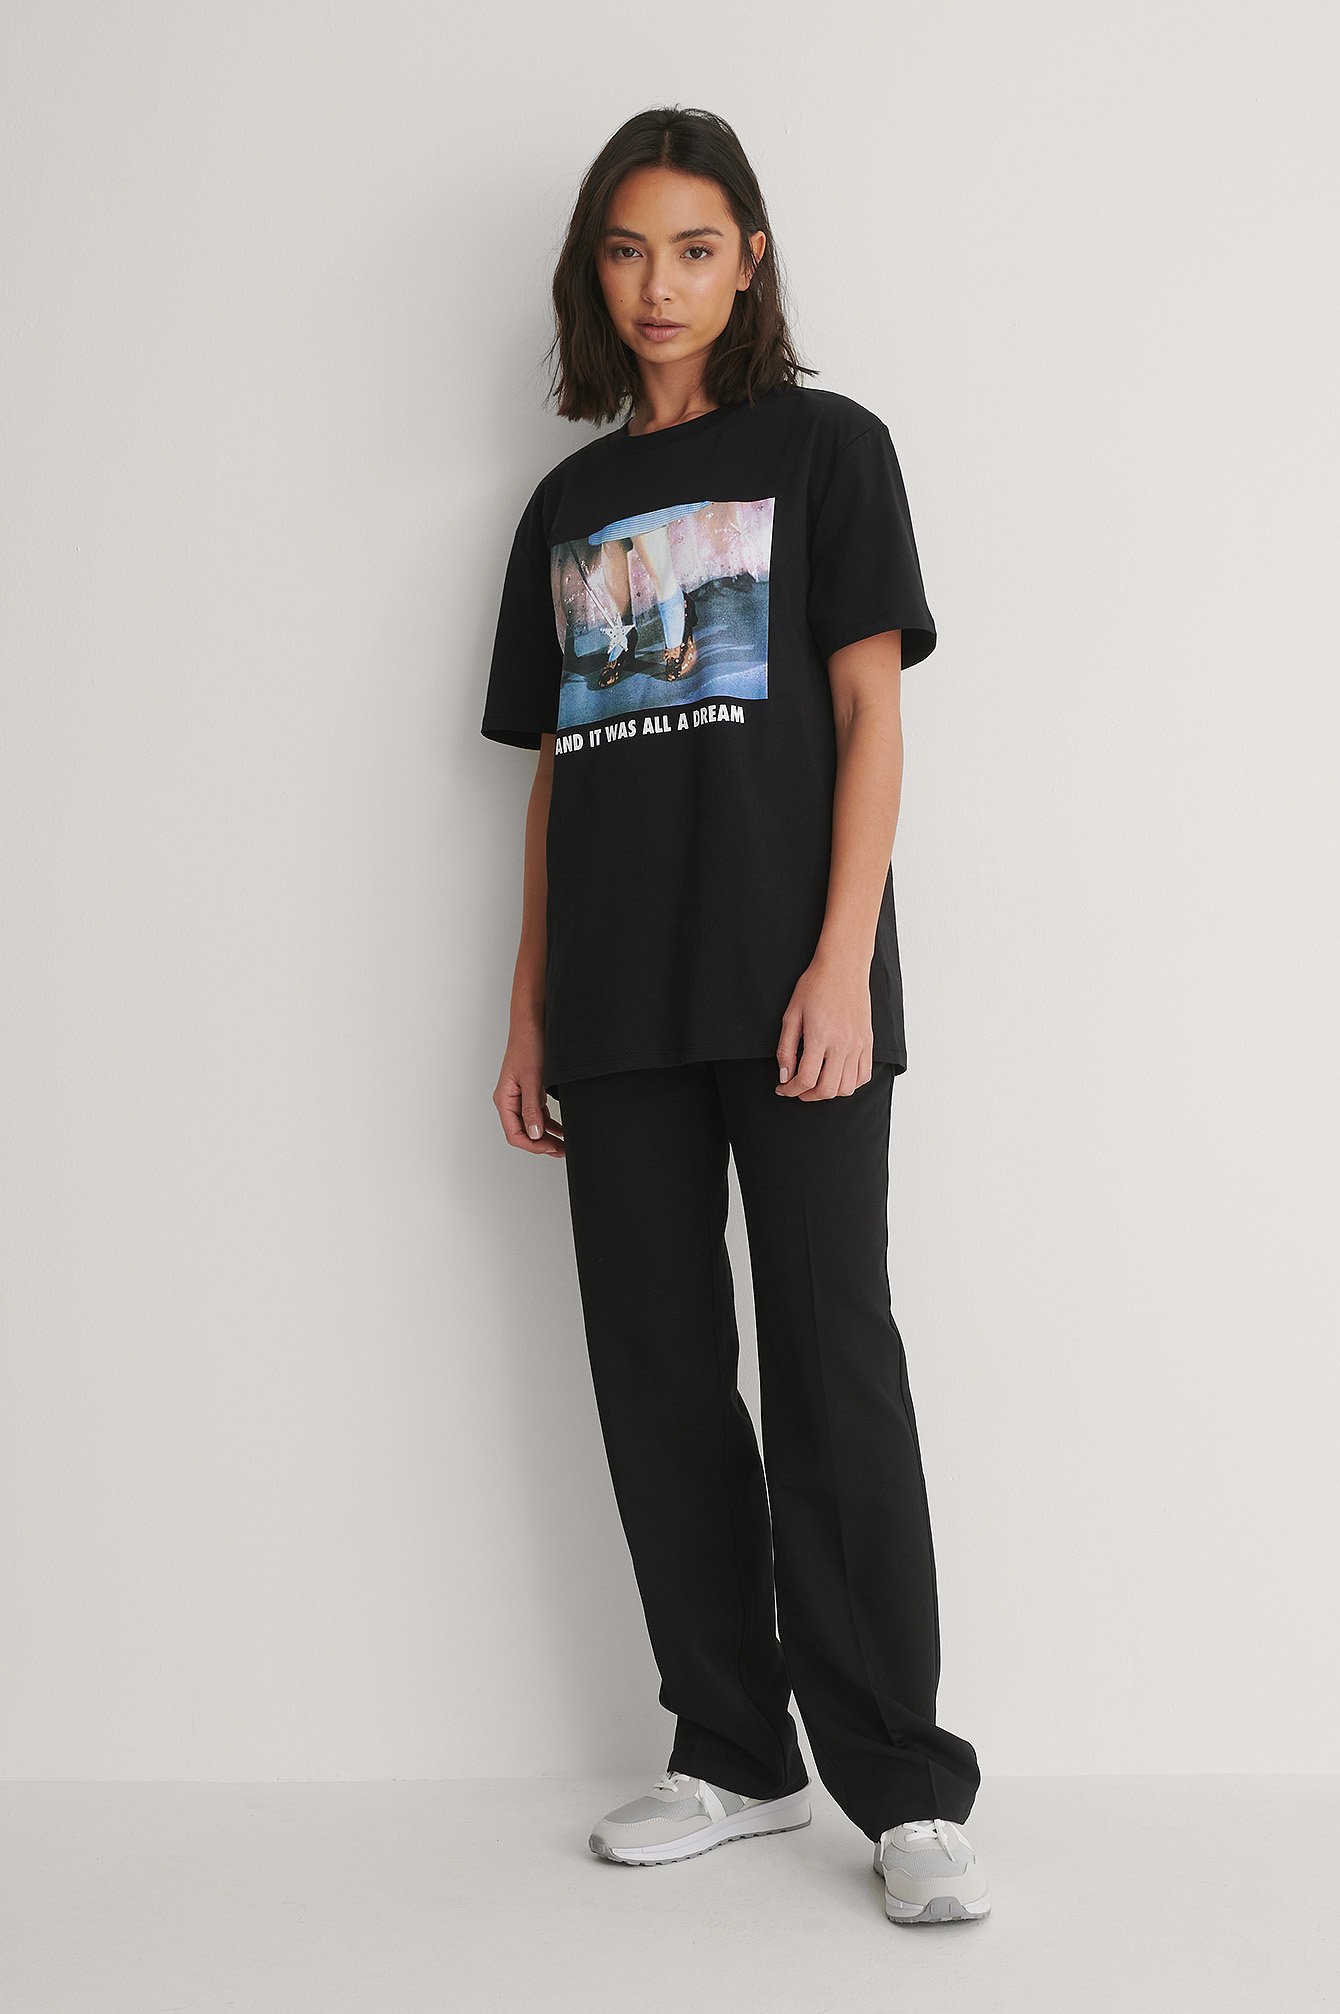 Unisex Tee and Black Suit Pants Outfit.